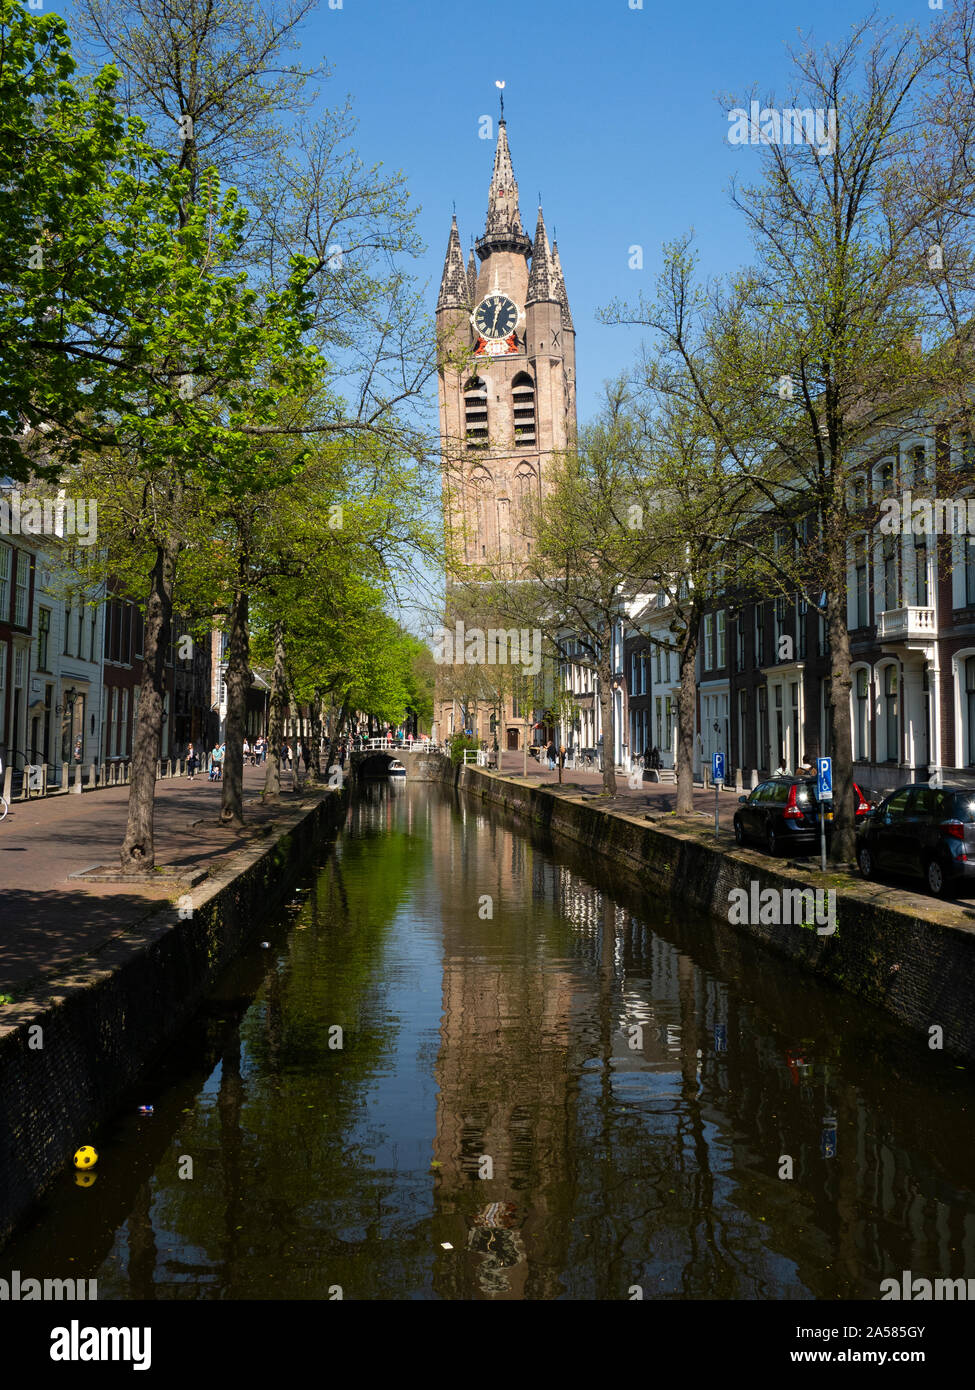 Old town with Oude Kerk church steeple rising above canal, Belft, South Holland, Netherlands Stock Photo